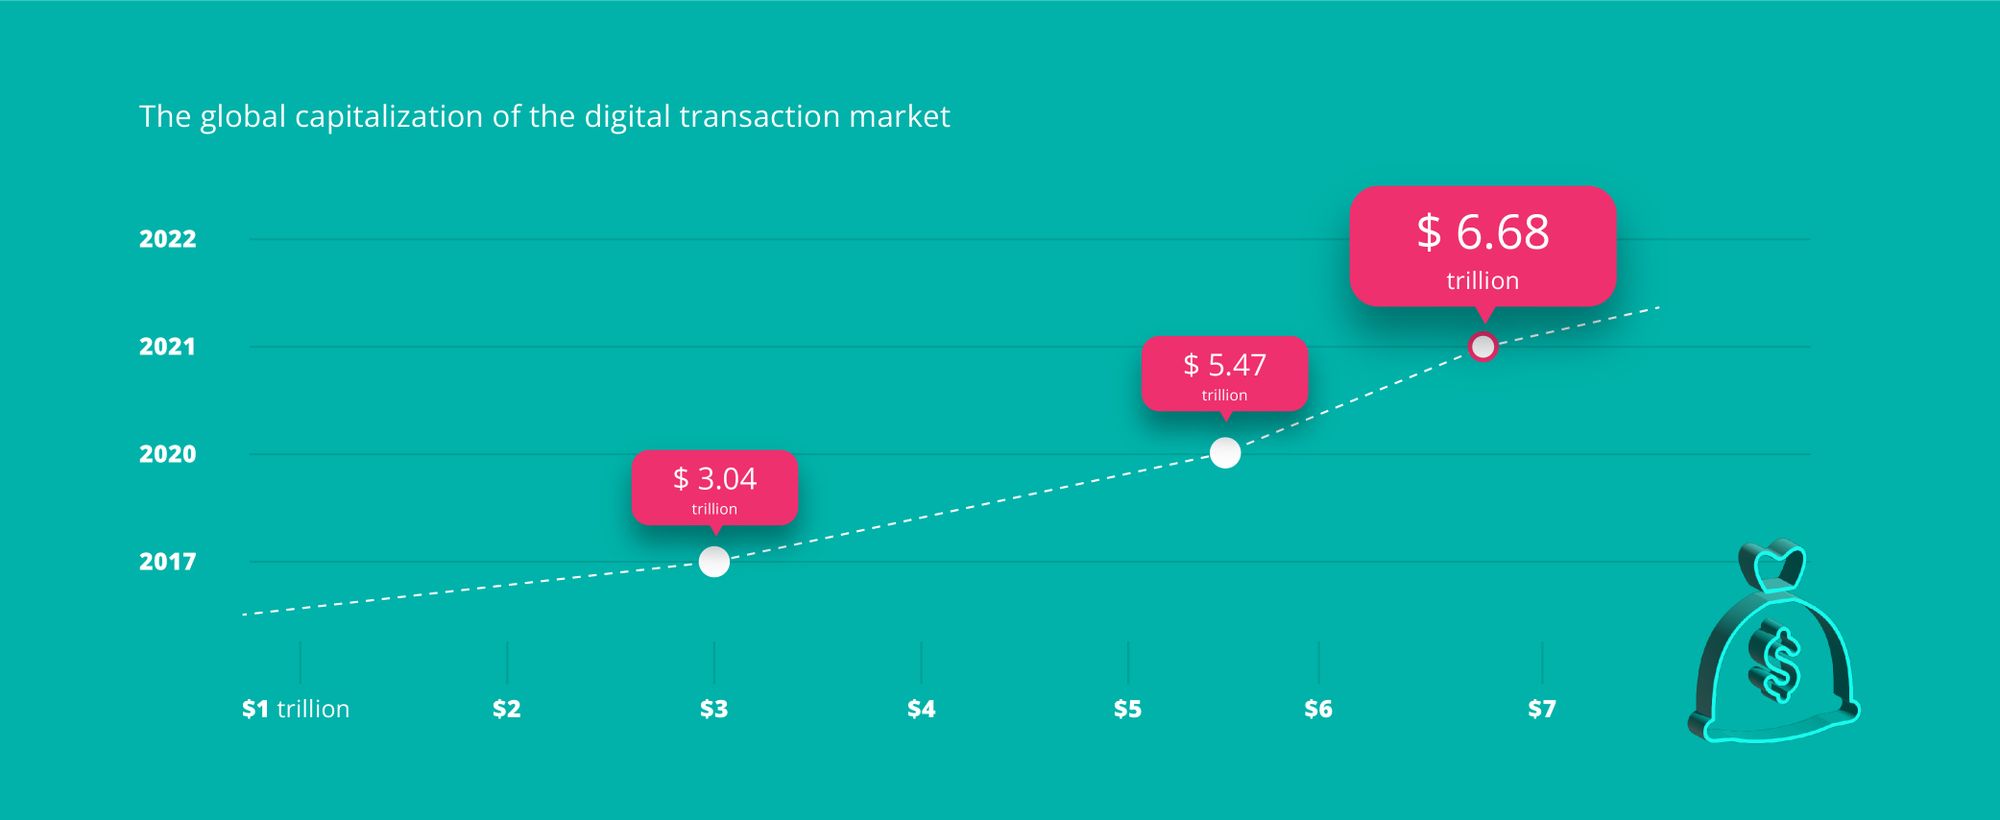 The global capitalization of the digital transaction market